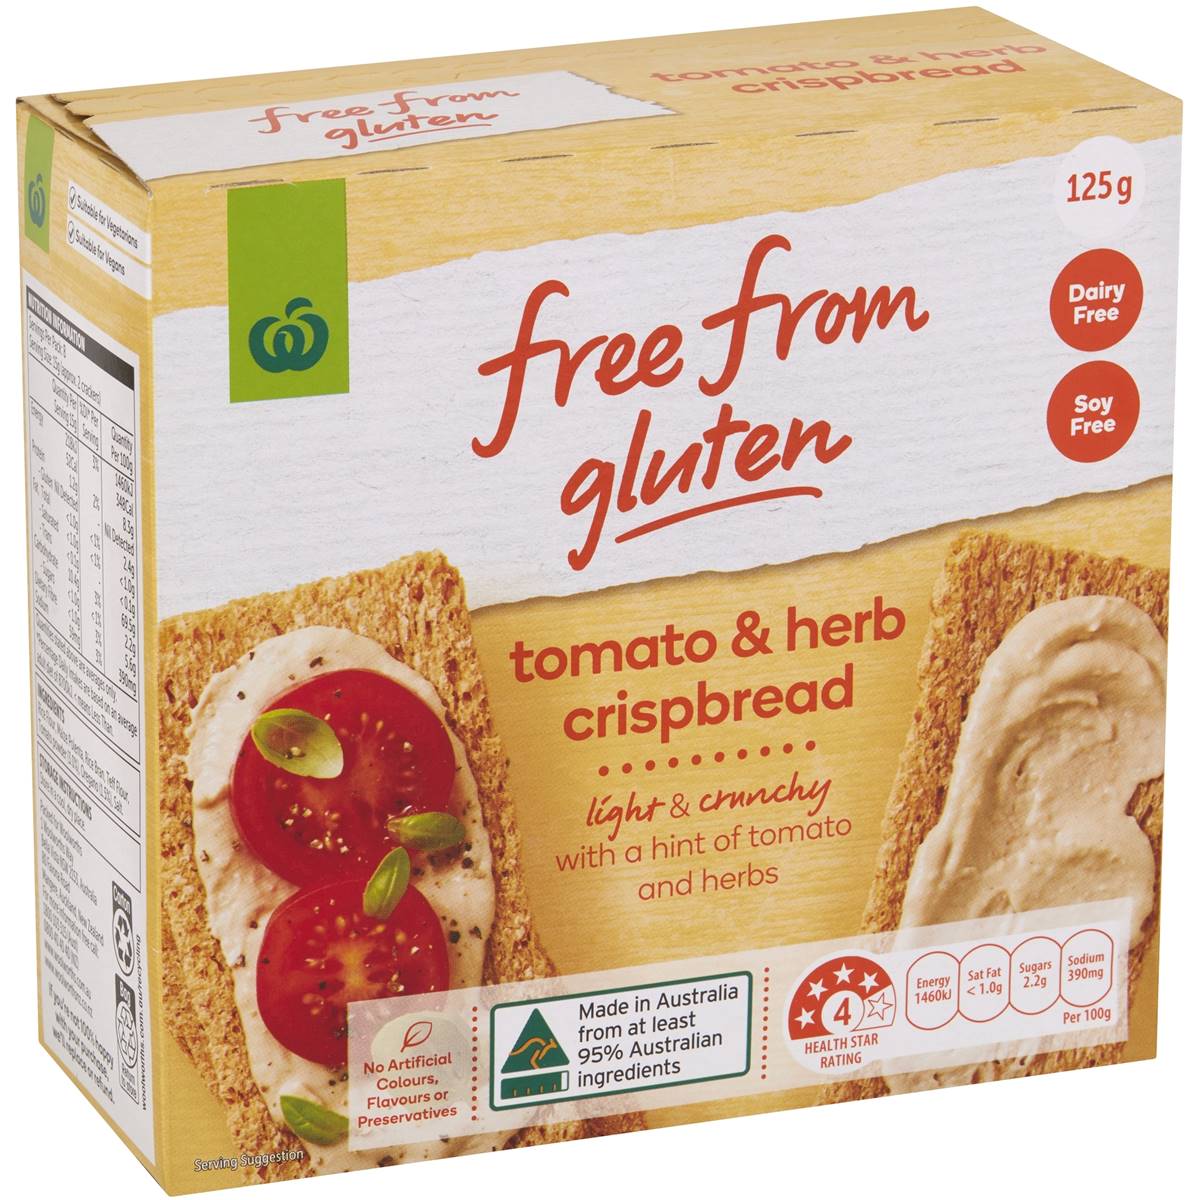 Calories in Woolworths Free From Gluten Tomato & Herb Crispbread